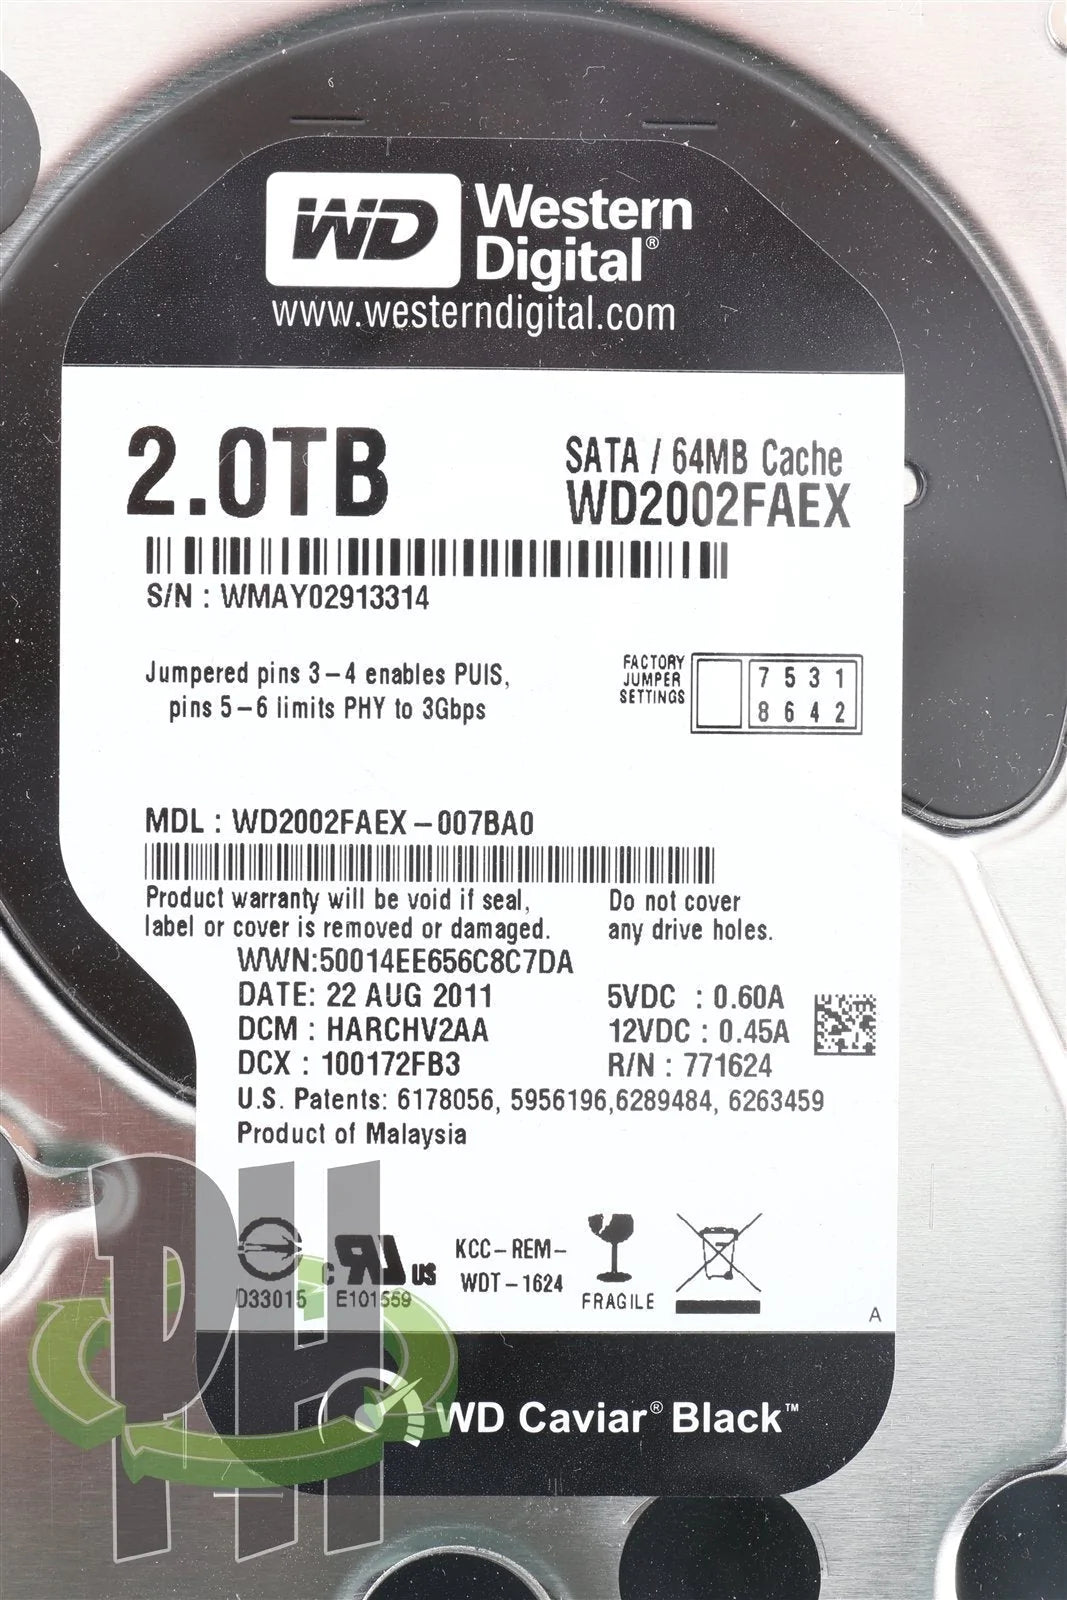 WD WD2002FAEX 2 TB SATA 64MB 7200RPM Caviar Black Formatted for Apple